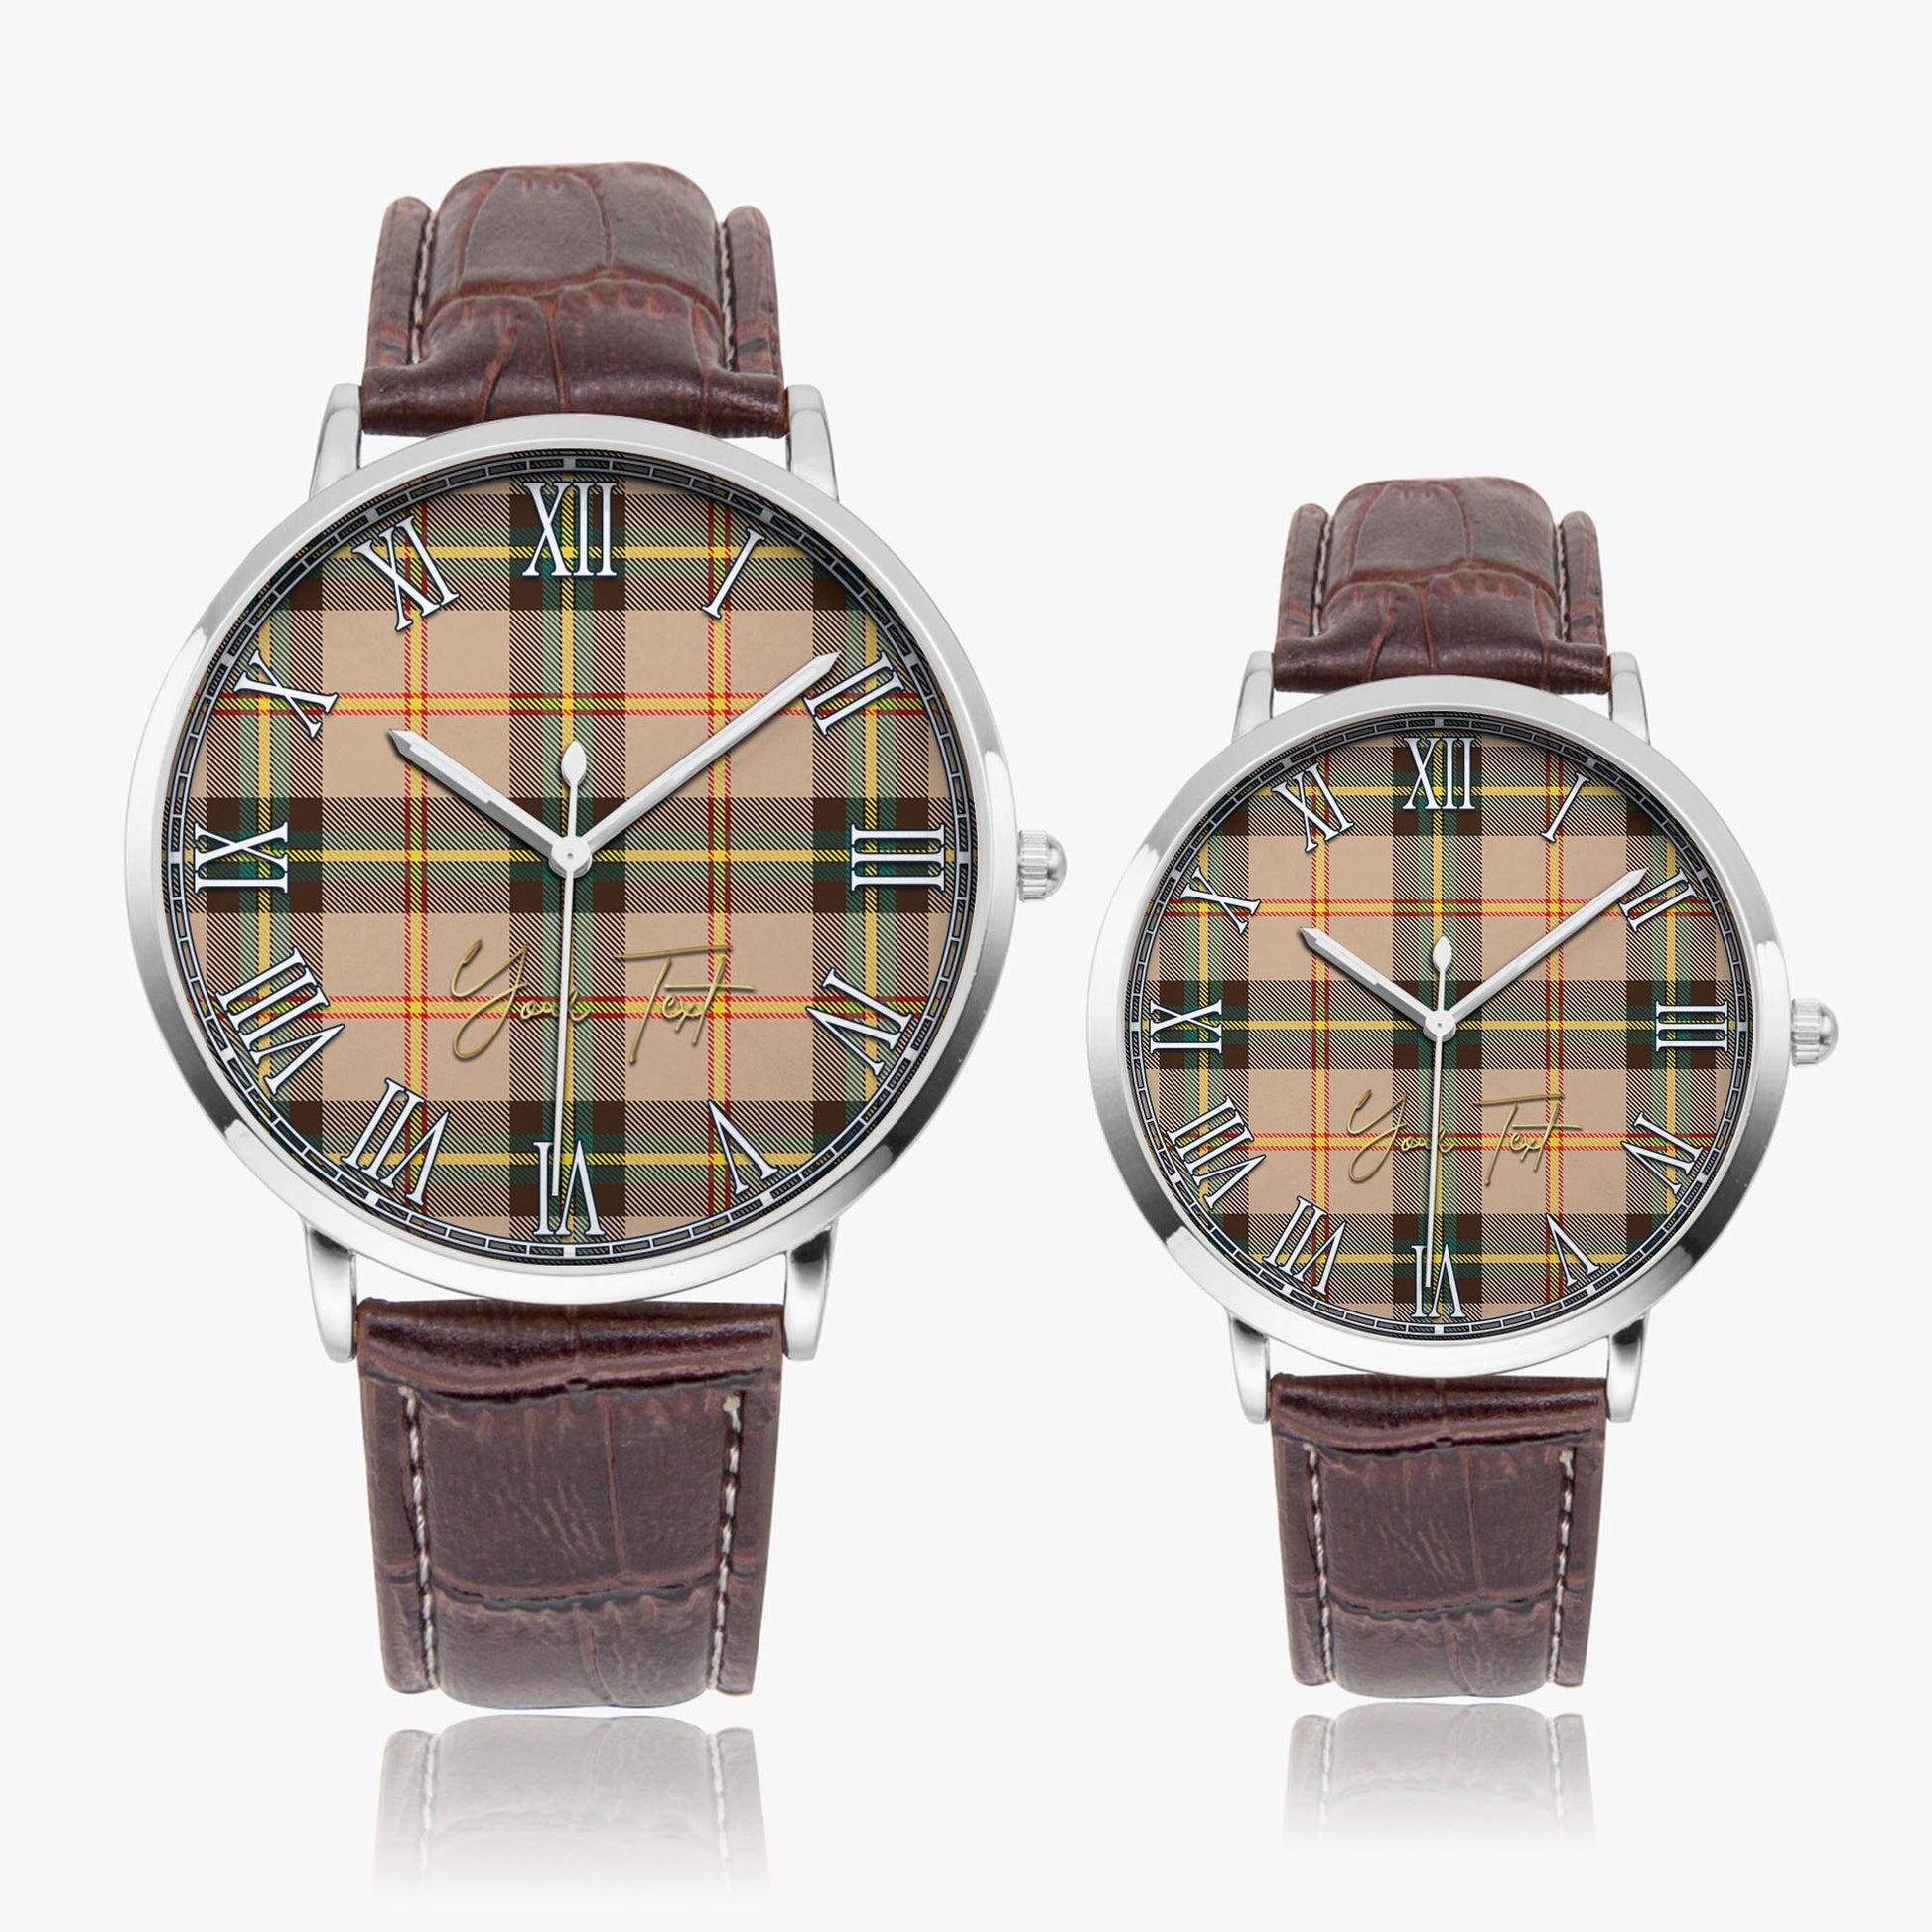 Saskatchewan Province Canada Tartan Personalized Your Text Leather Trap Quartz Watch Ultra Thin Silver Case With Brown Leather Strap - Tartanvibesclothing